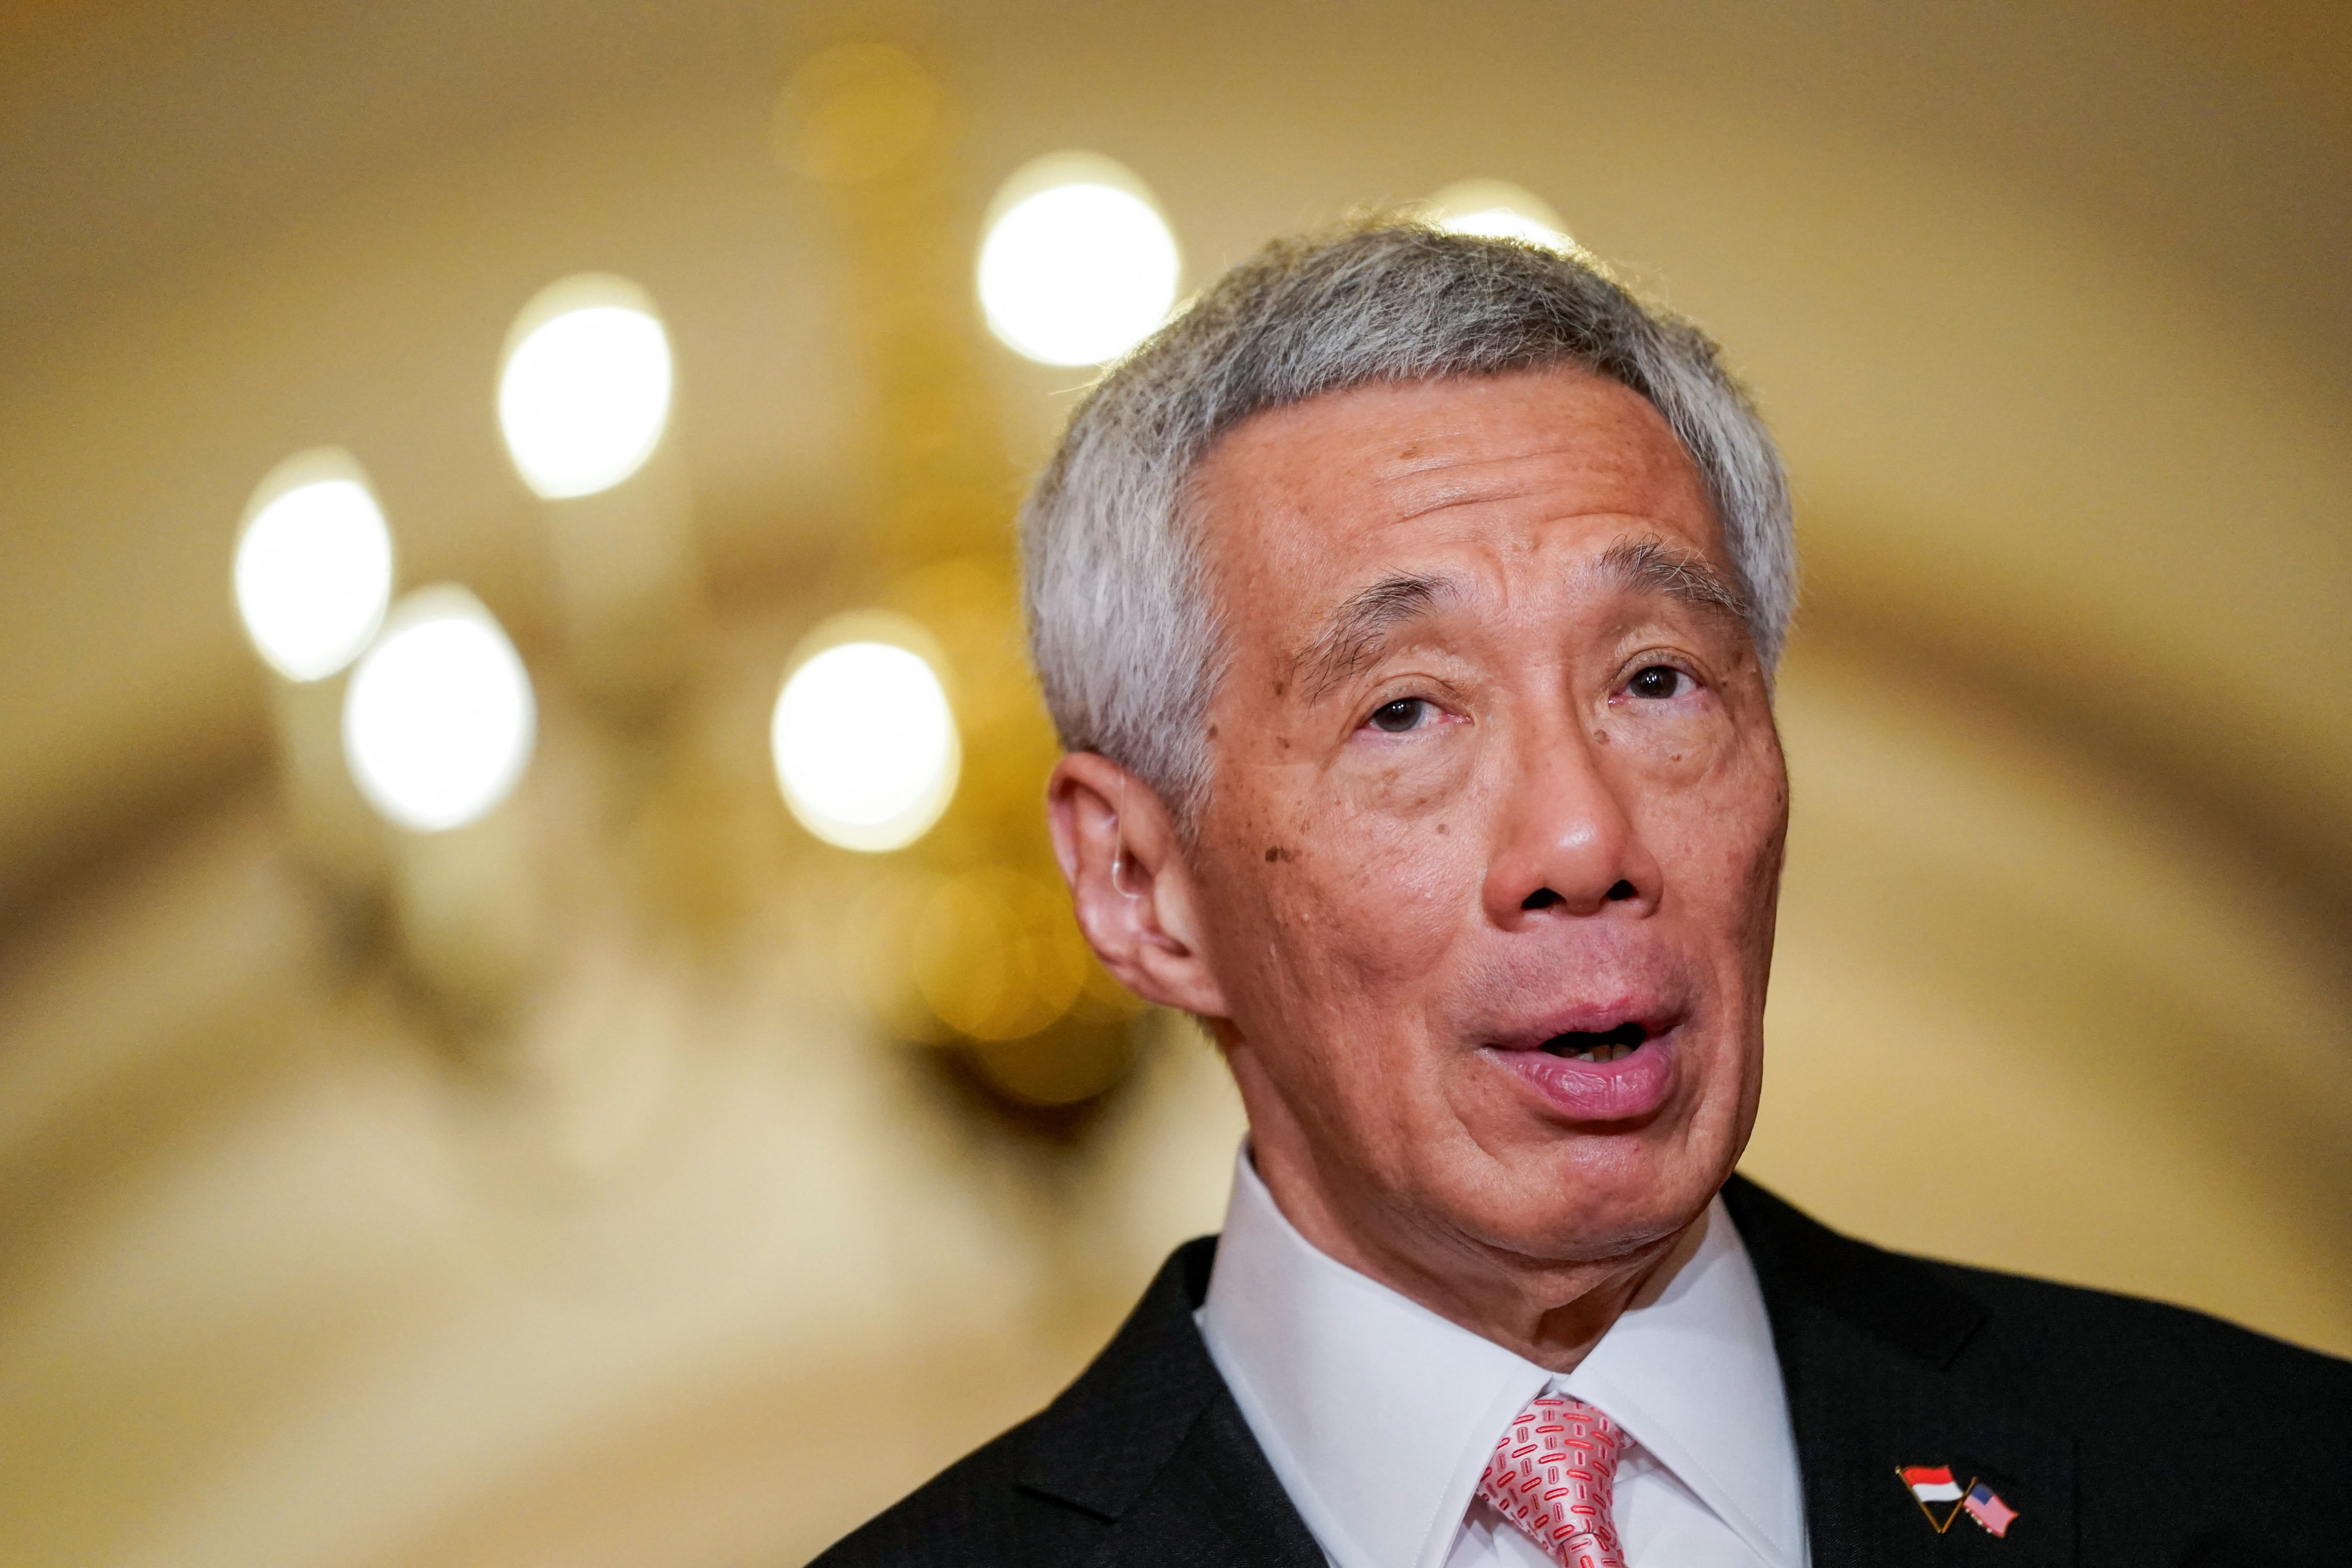 Singapore’s Prime Minister Lee Hsien Loong. Photo: Reuters